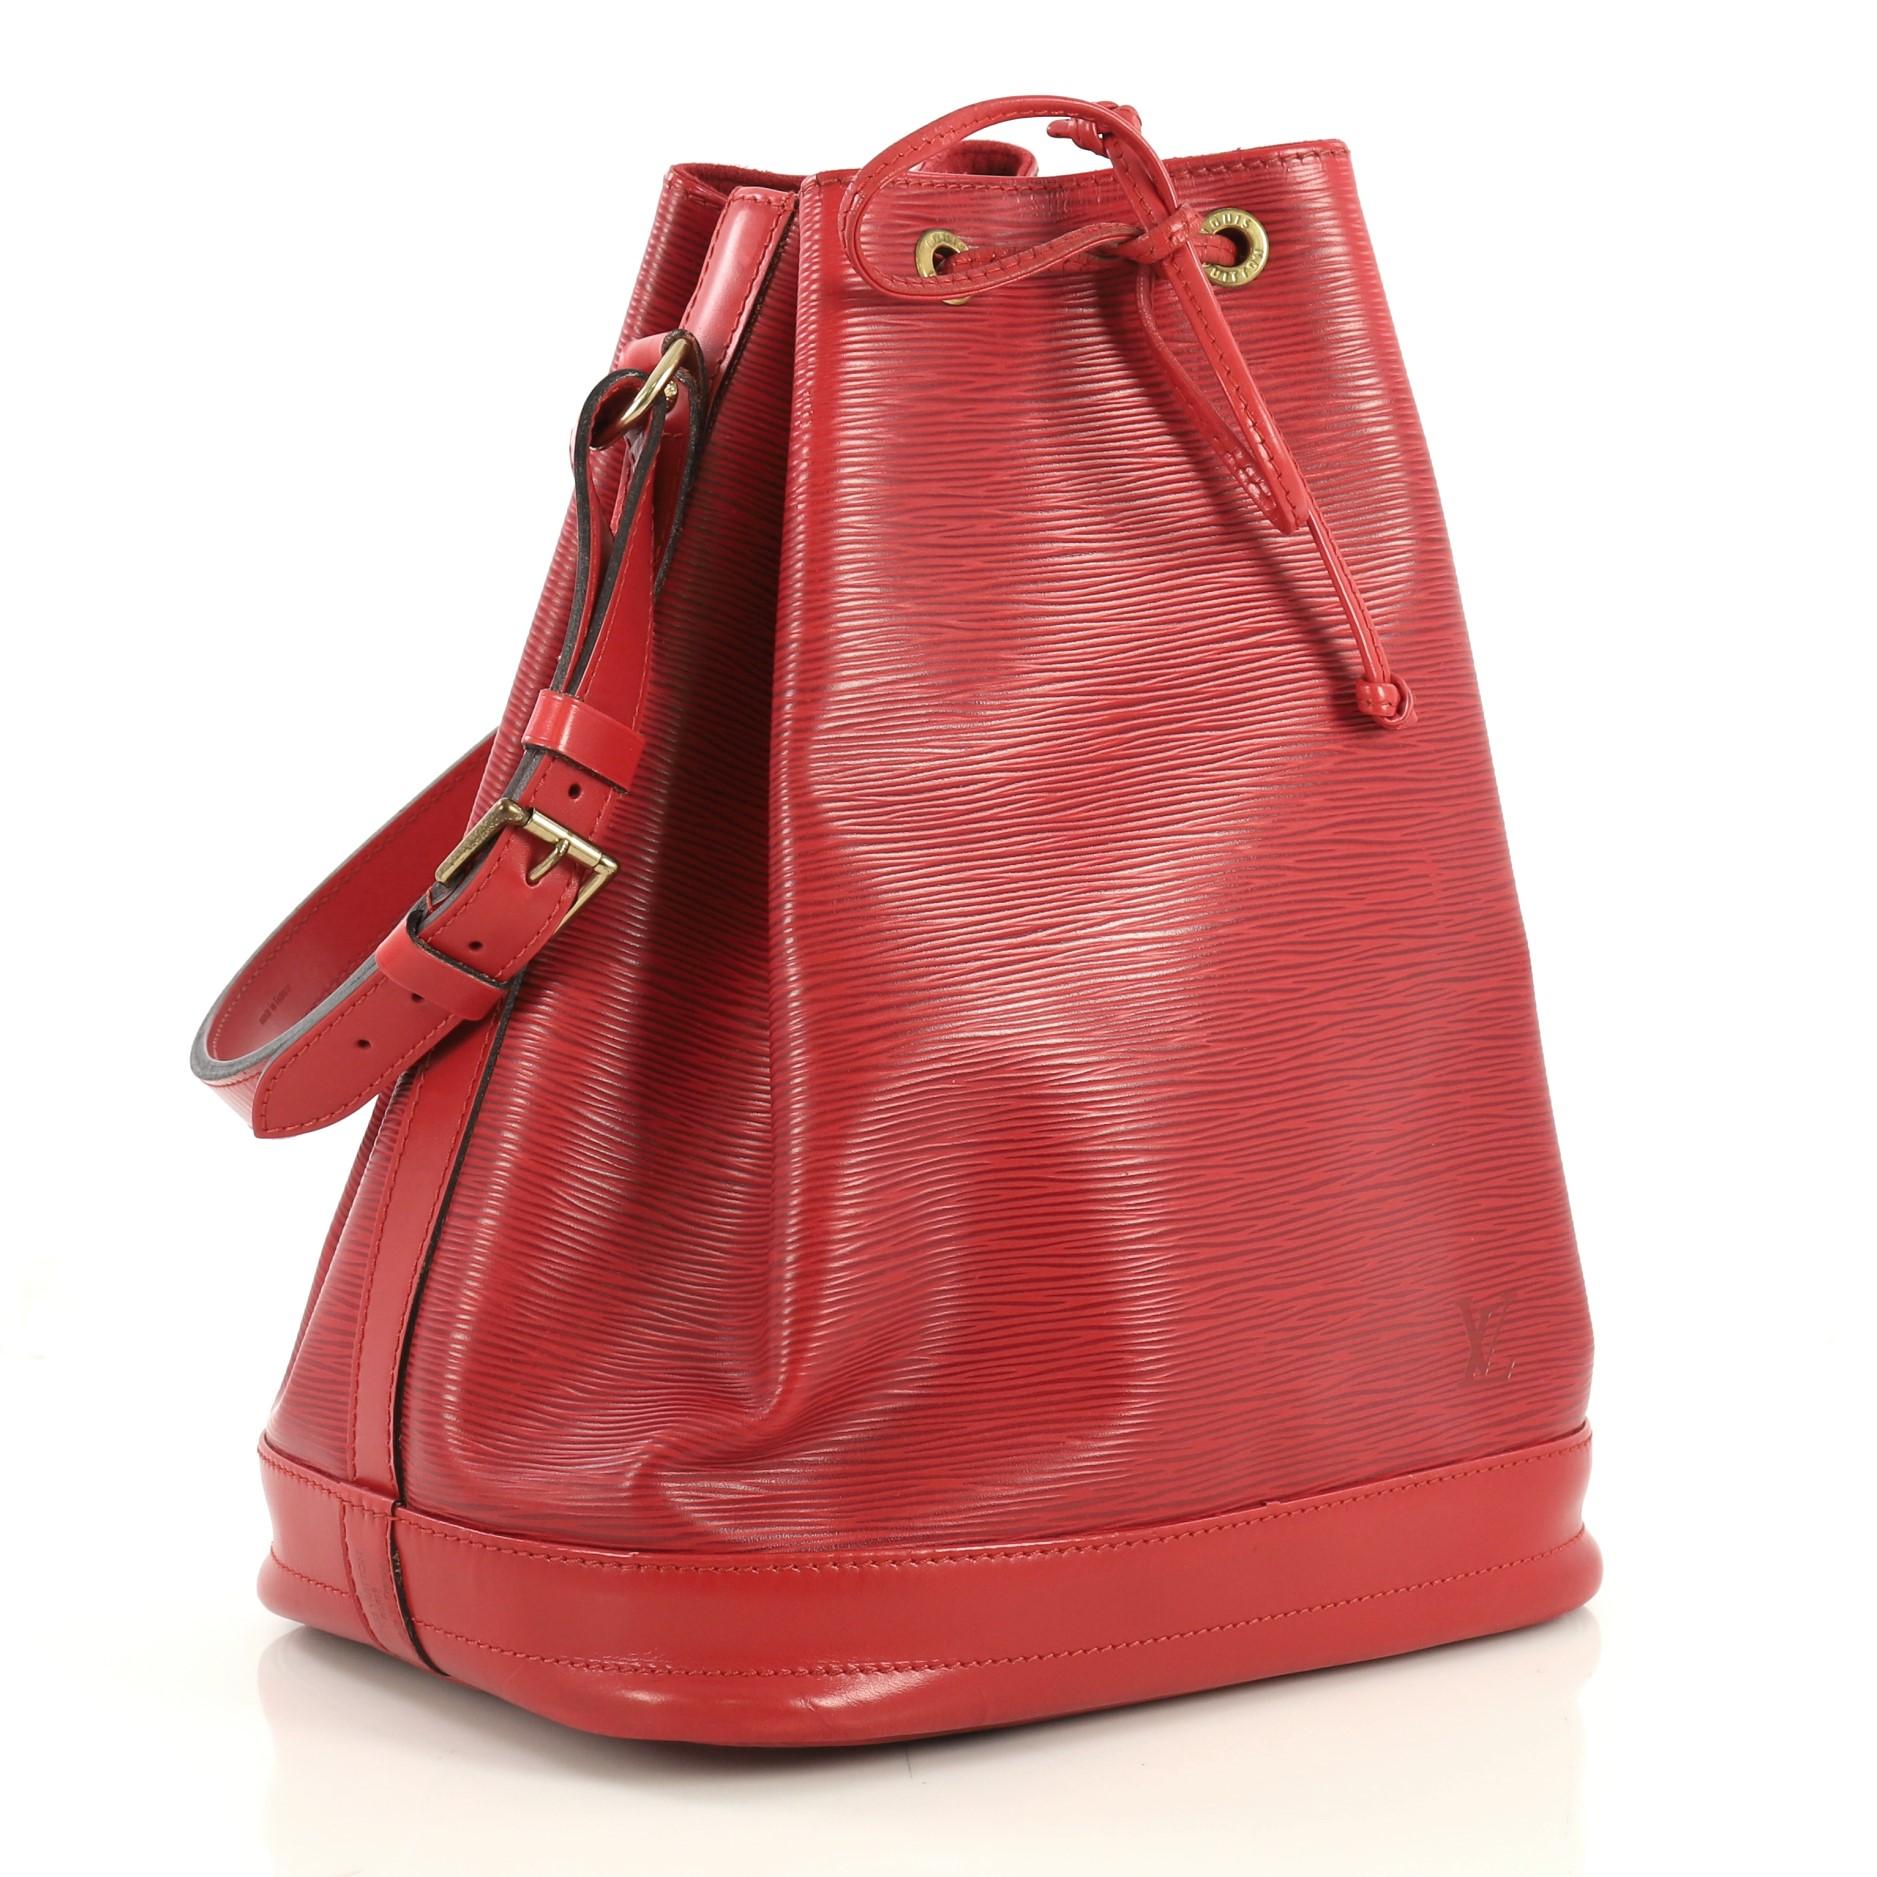 This Louis Vuitton Noe Handbag Epi Leather Large, crafted in red epi leather, features an adjustable shoulder strap, leather drawstring threaded through metal eyelets, and gold-tone hardware. Its drawstring closure opens to a red microfiber interior